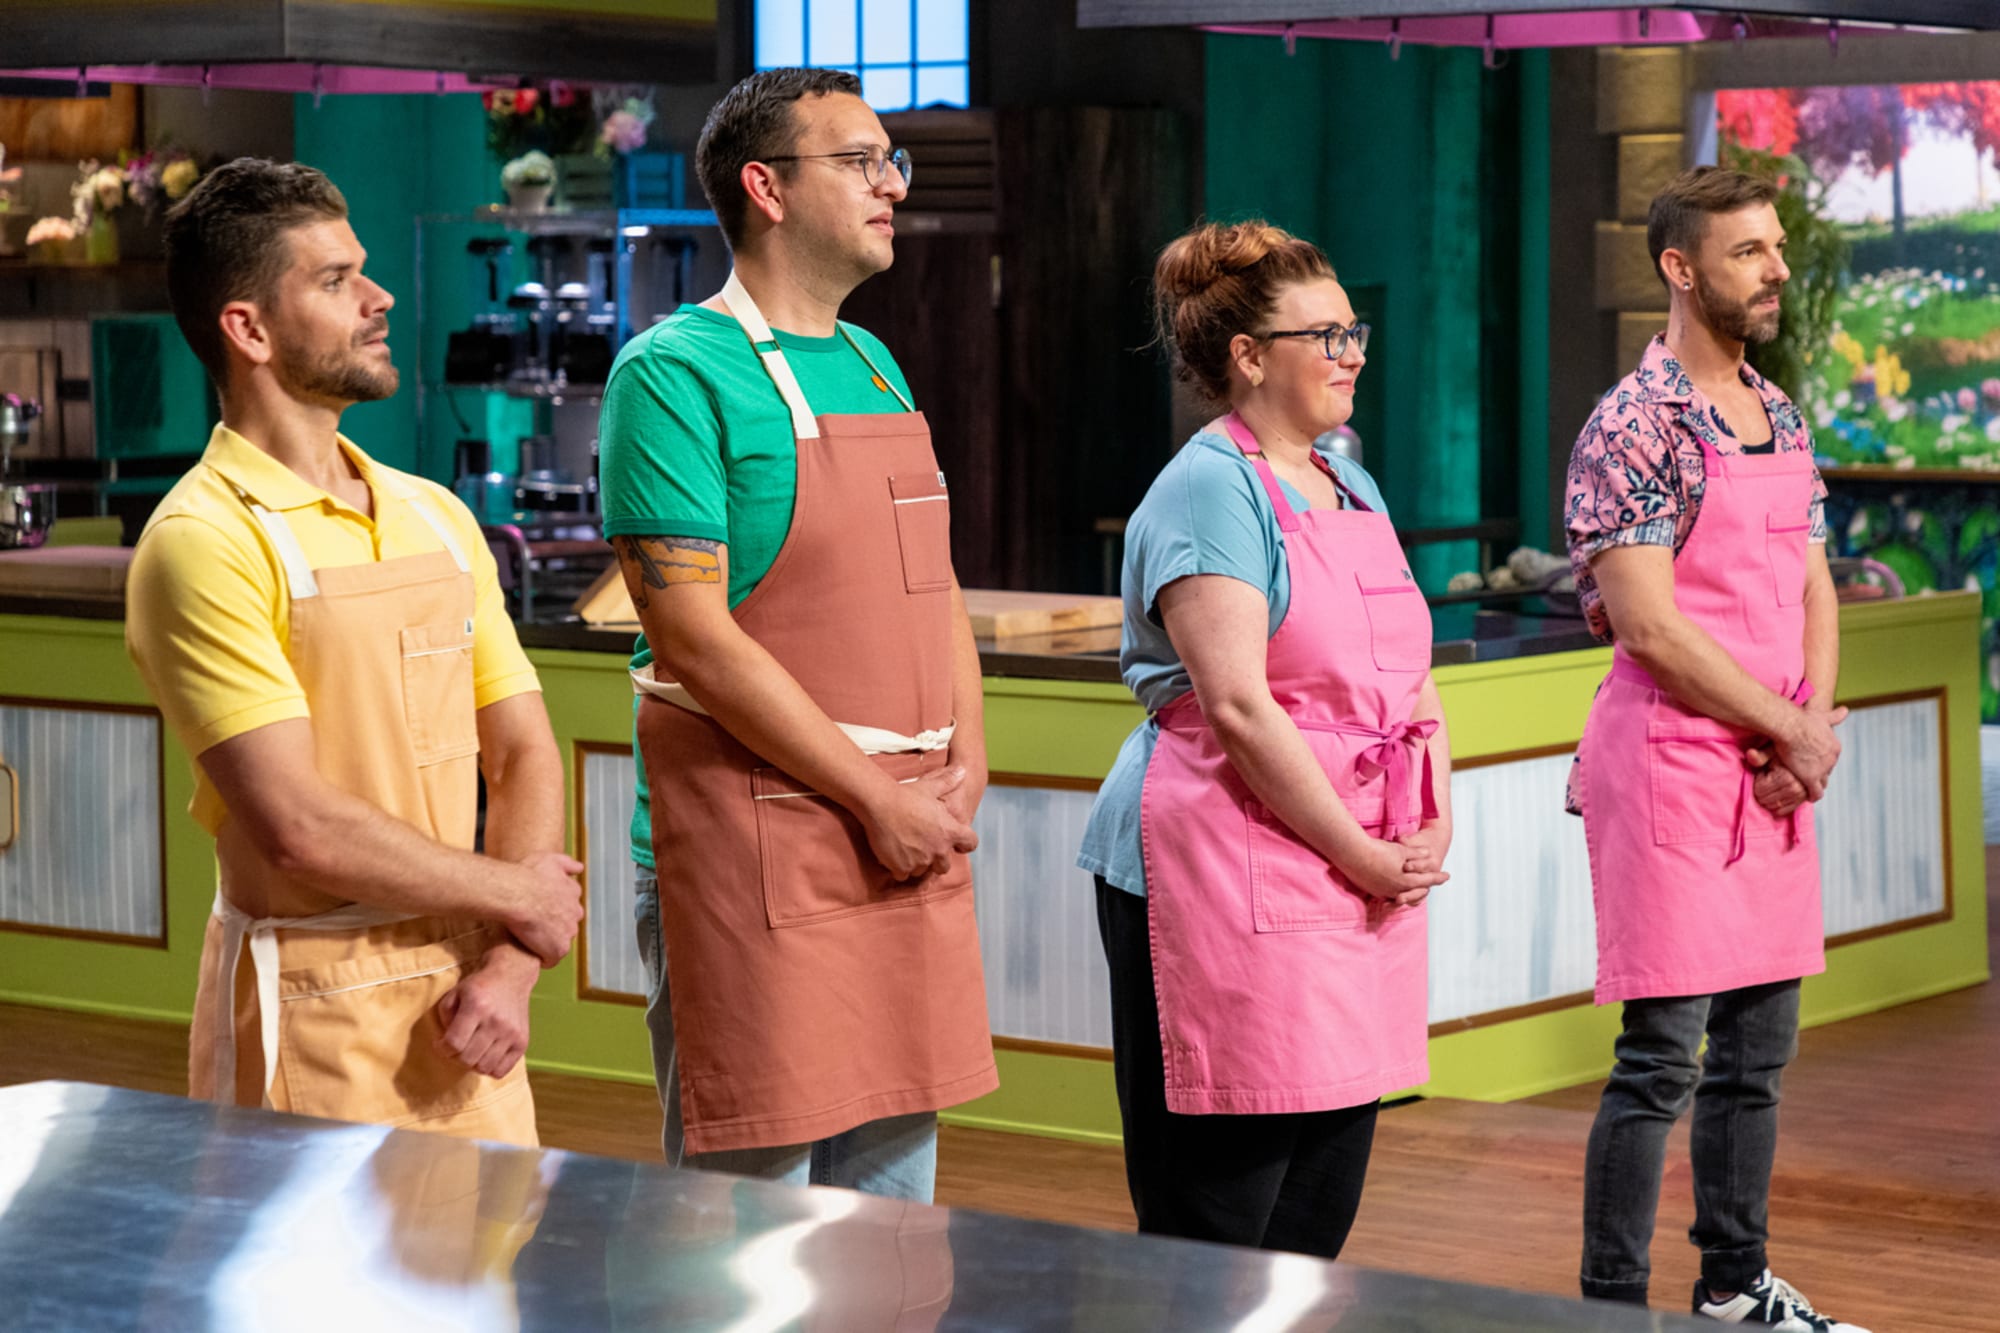 Spring Baking Championship Season 9 winner Baking with love for the win